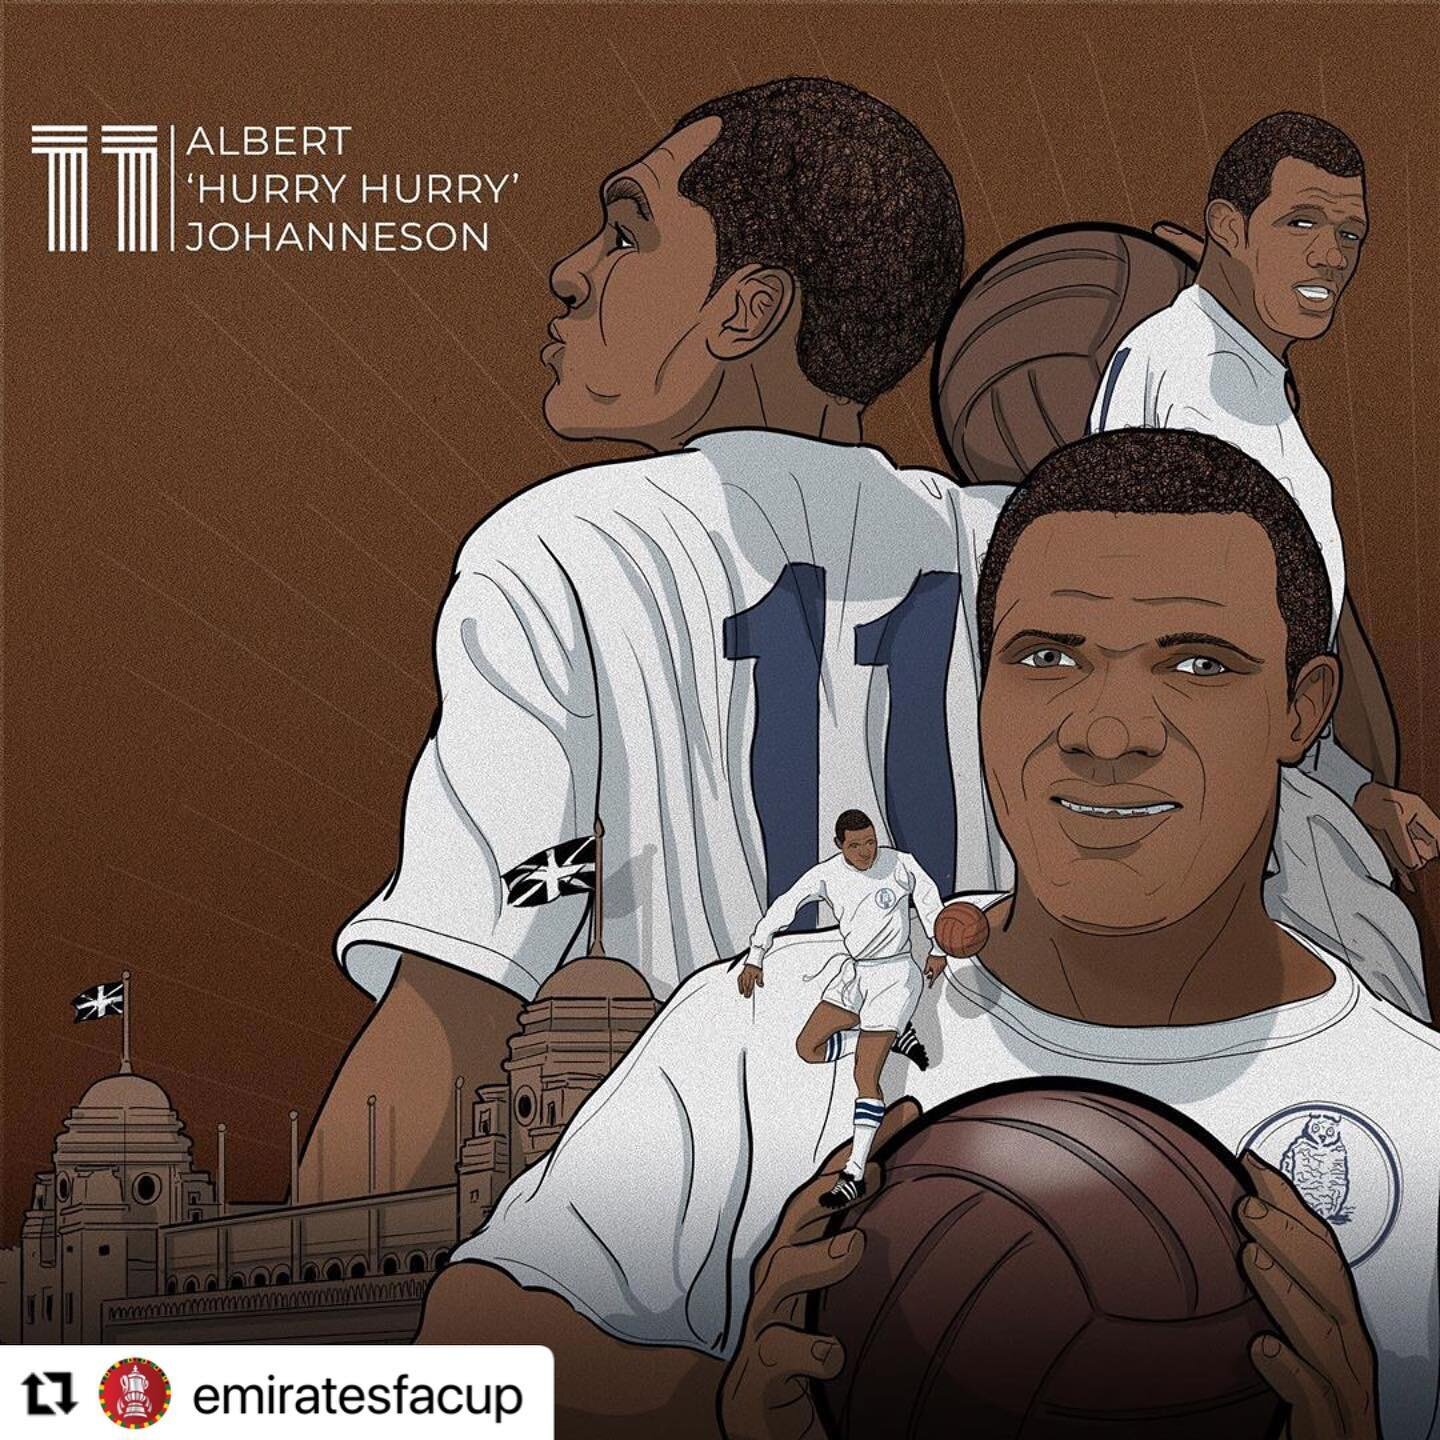 #Repost @emiratesfacup with @make_repost
・・・
𝗔𝗹𝗯𝗲𝗿𝘁 𝗝𝗼𝗵𝗮𝗻𝗻𝗲𝘀𝗼𝗻: one of the first Black players to feature in an #EmiratesFACup 🙌

#monkeysvsrobots #illustration #illustrator #graphicdesign #designer  #sketchbook #sketchbookart #linew